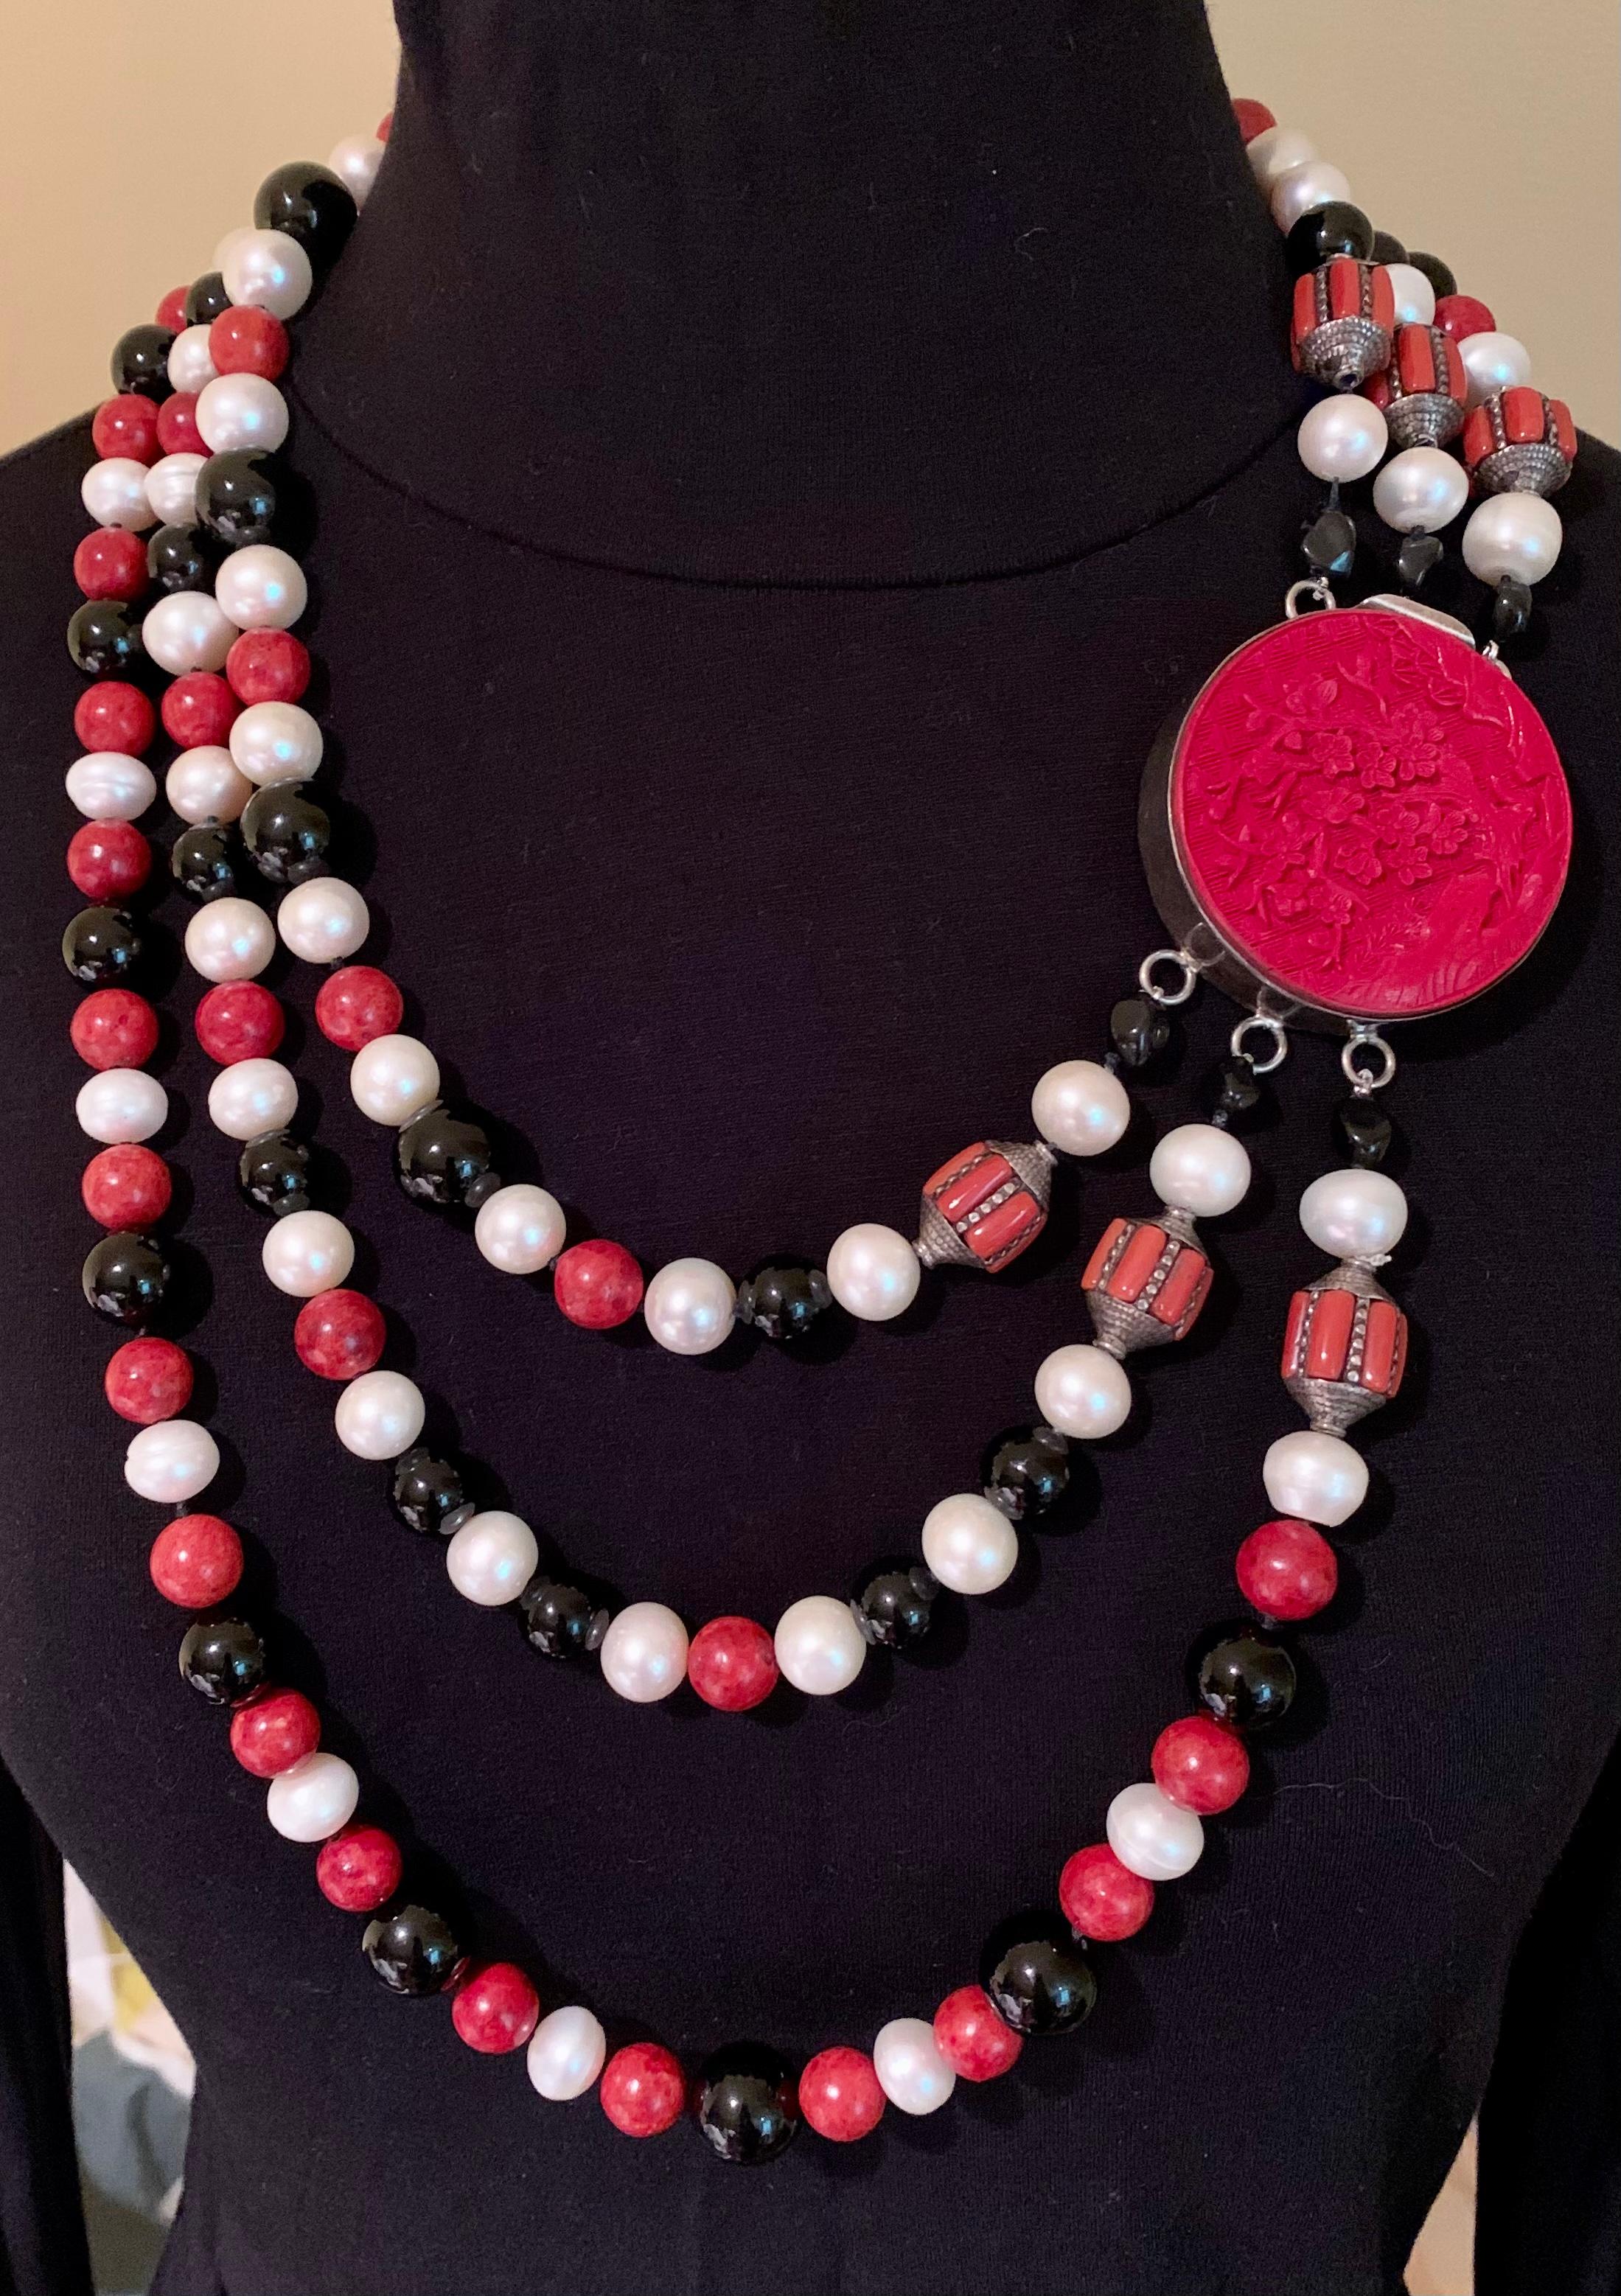 Striking, large triple strand Asian motif pearl, coral, onyx and sponge coral A. Jeschel Elaine Silverstein One-of-a-Kind statement necklace.
Provenance: from the estate of a noted New York City psychiatrist and collector of striking, unusual,